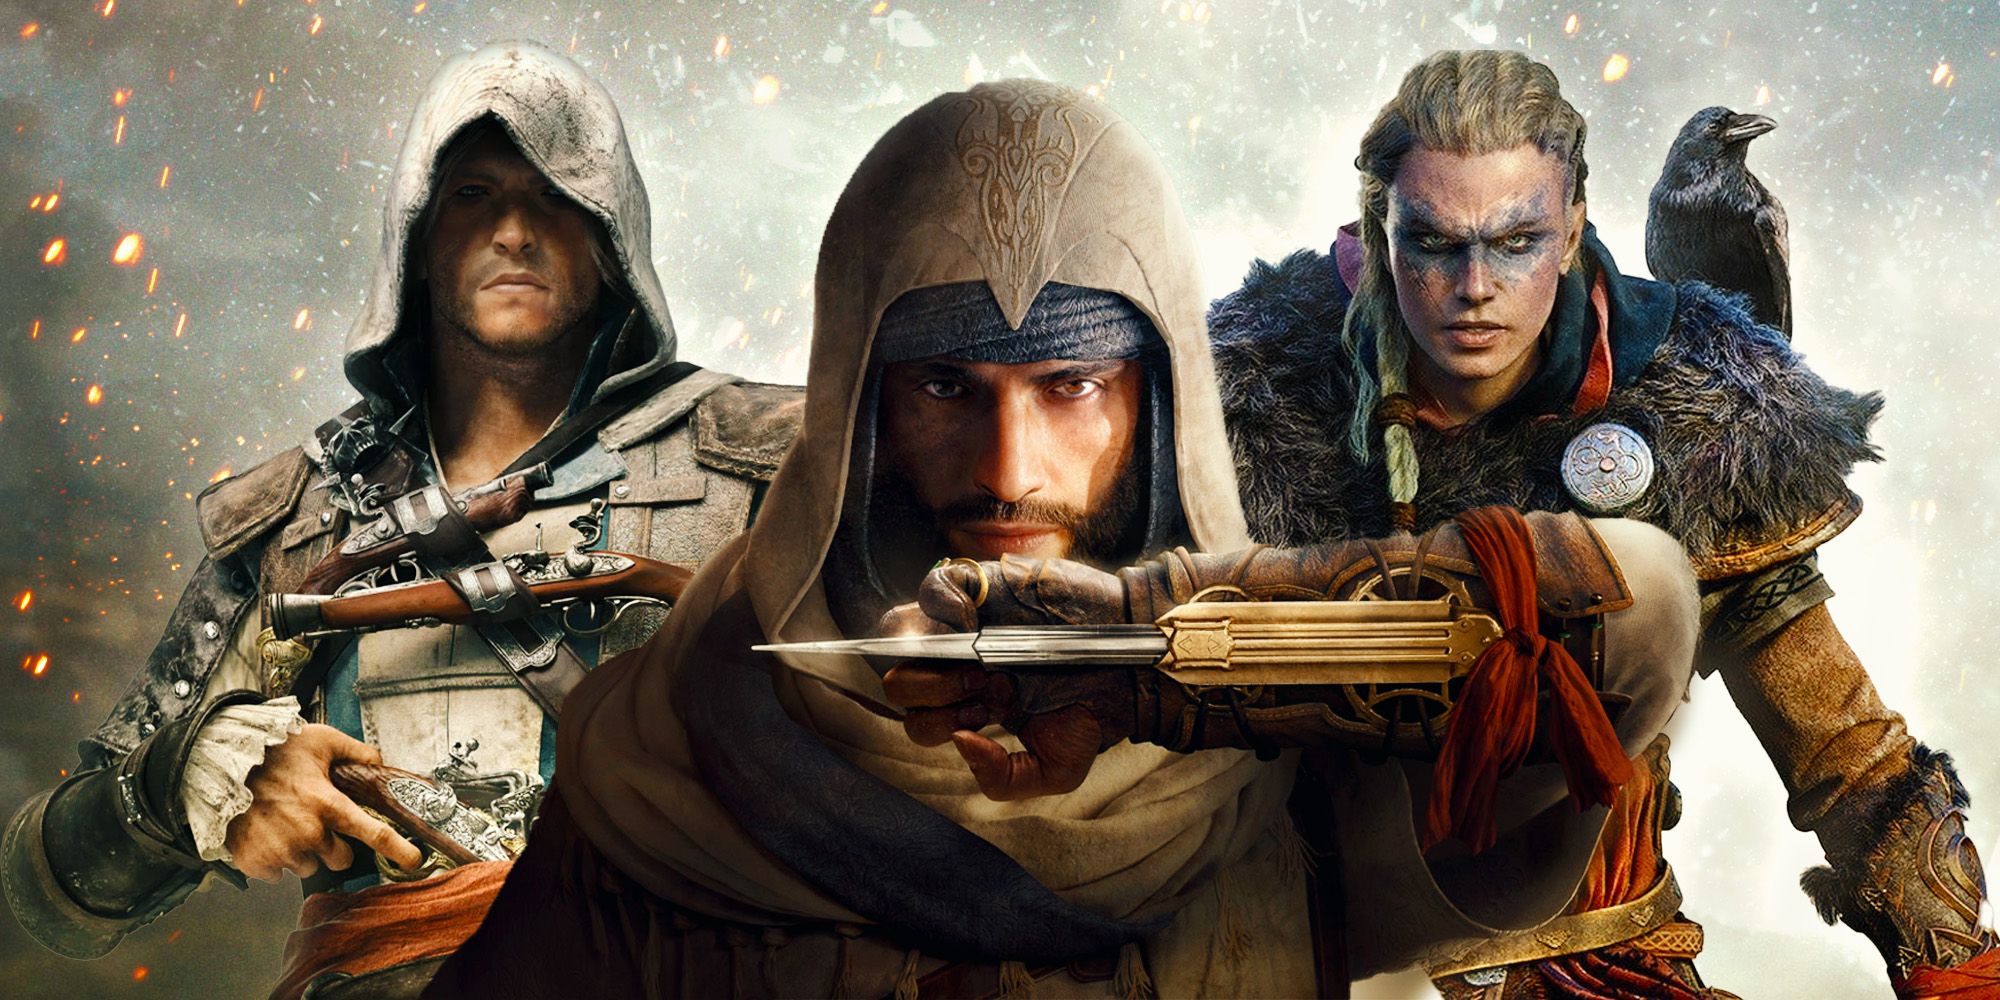 Blakwoodz on X: Ubisoft's E3 2023 is arriving, What are you guys the most  excited for? Assassin's Creed Mirage Assassin's Creed Nexus The Division  Heartland XDefiant Avatar Frontiers of Pandora Skull &